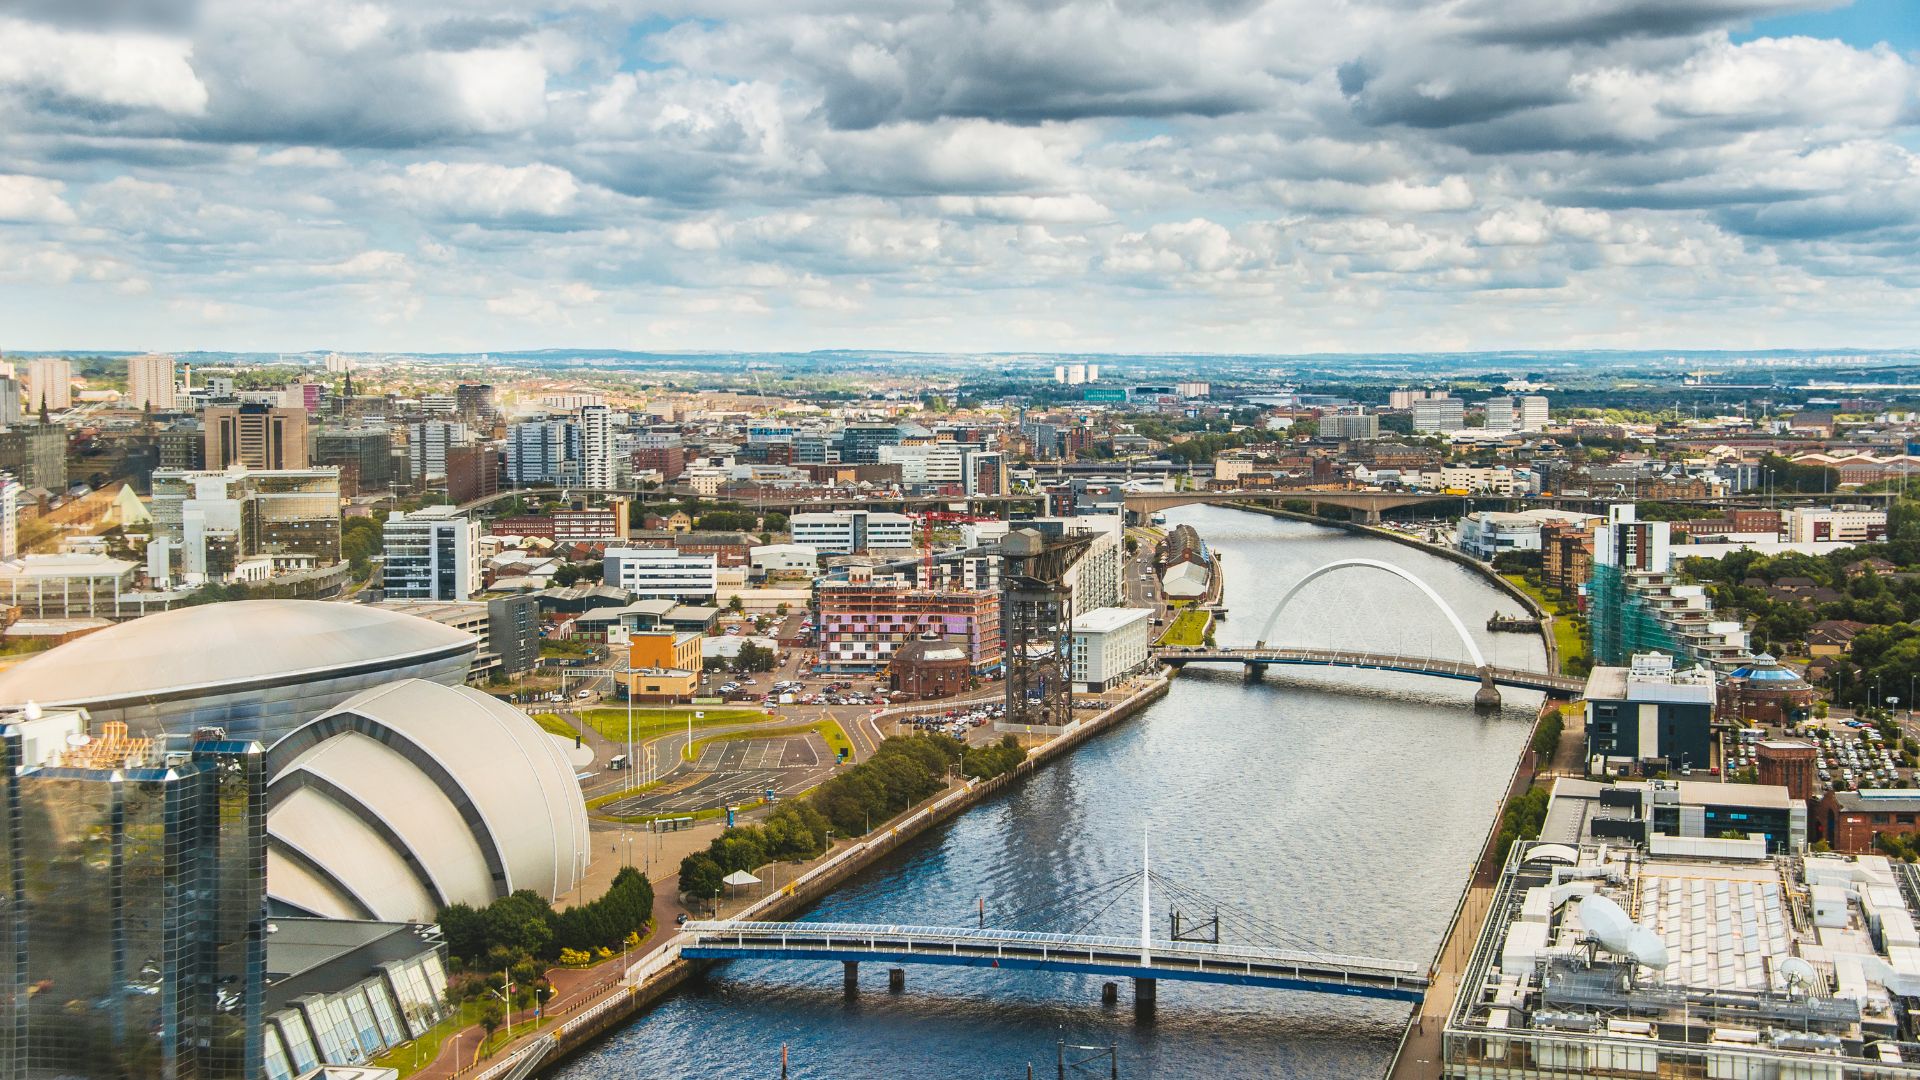 Birdseye view of Glasgow City centre, including the River Clyde, Armadillo and OVO Hydro buildings